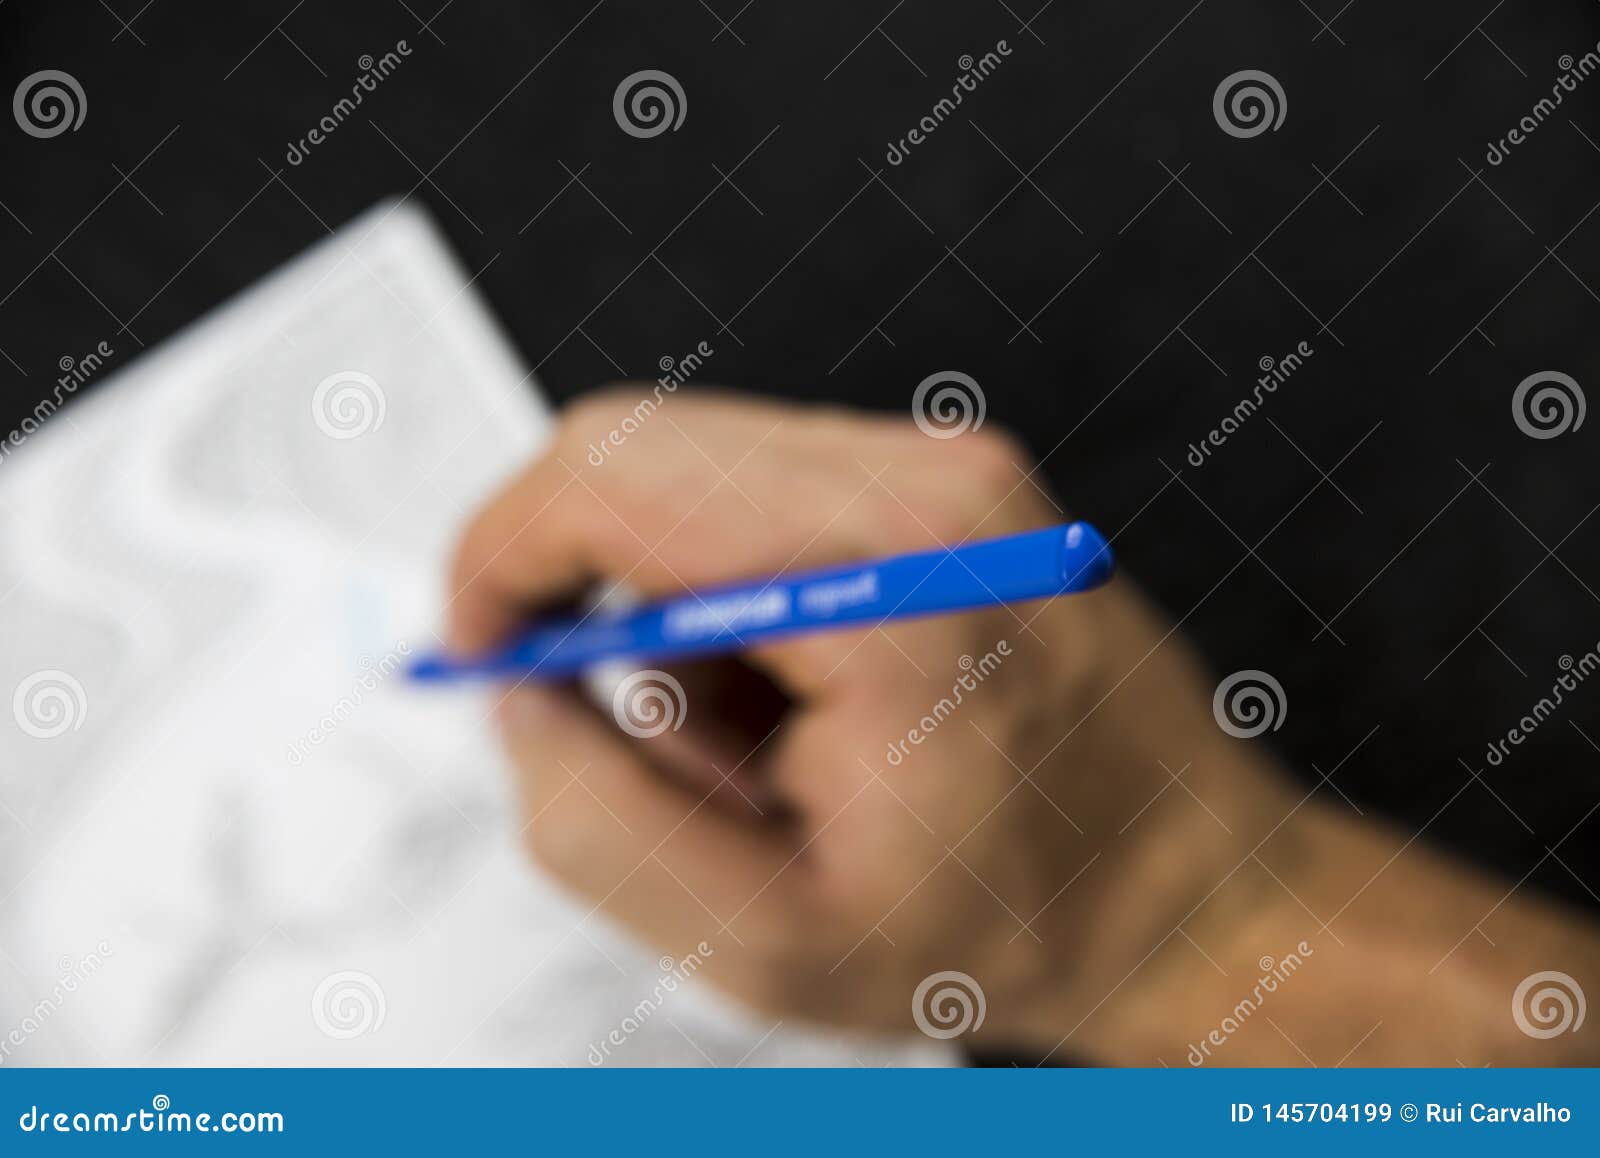 Blurred Hand Handling a Blue Pencil Colouring Stock Image - Image of ...